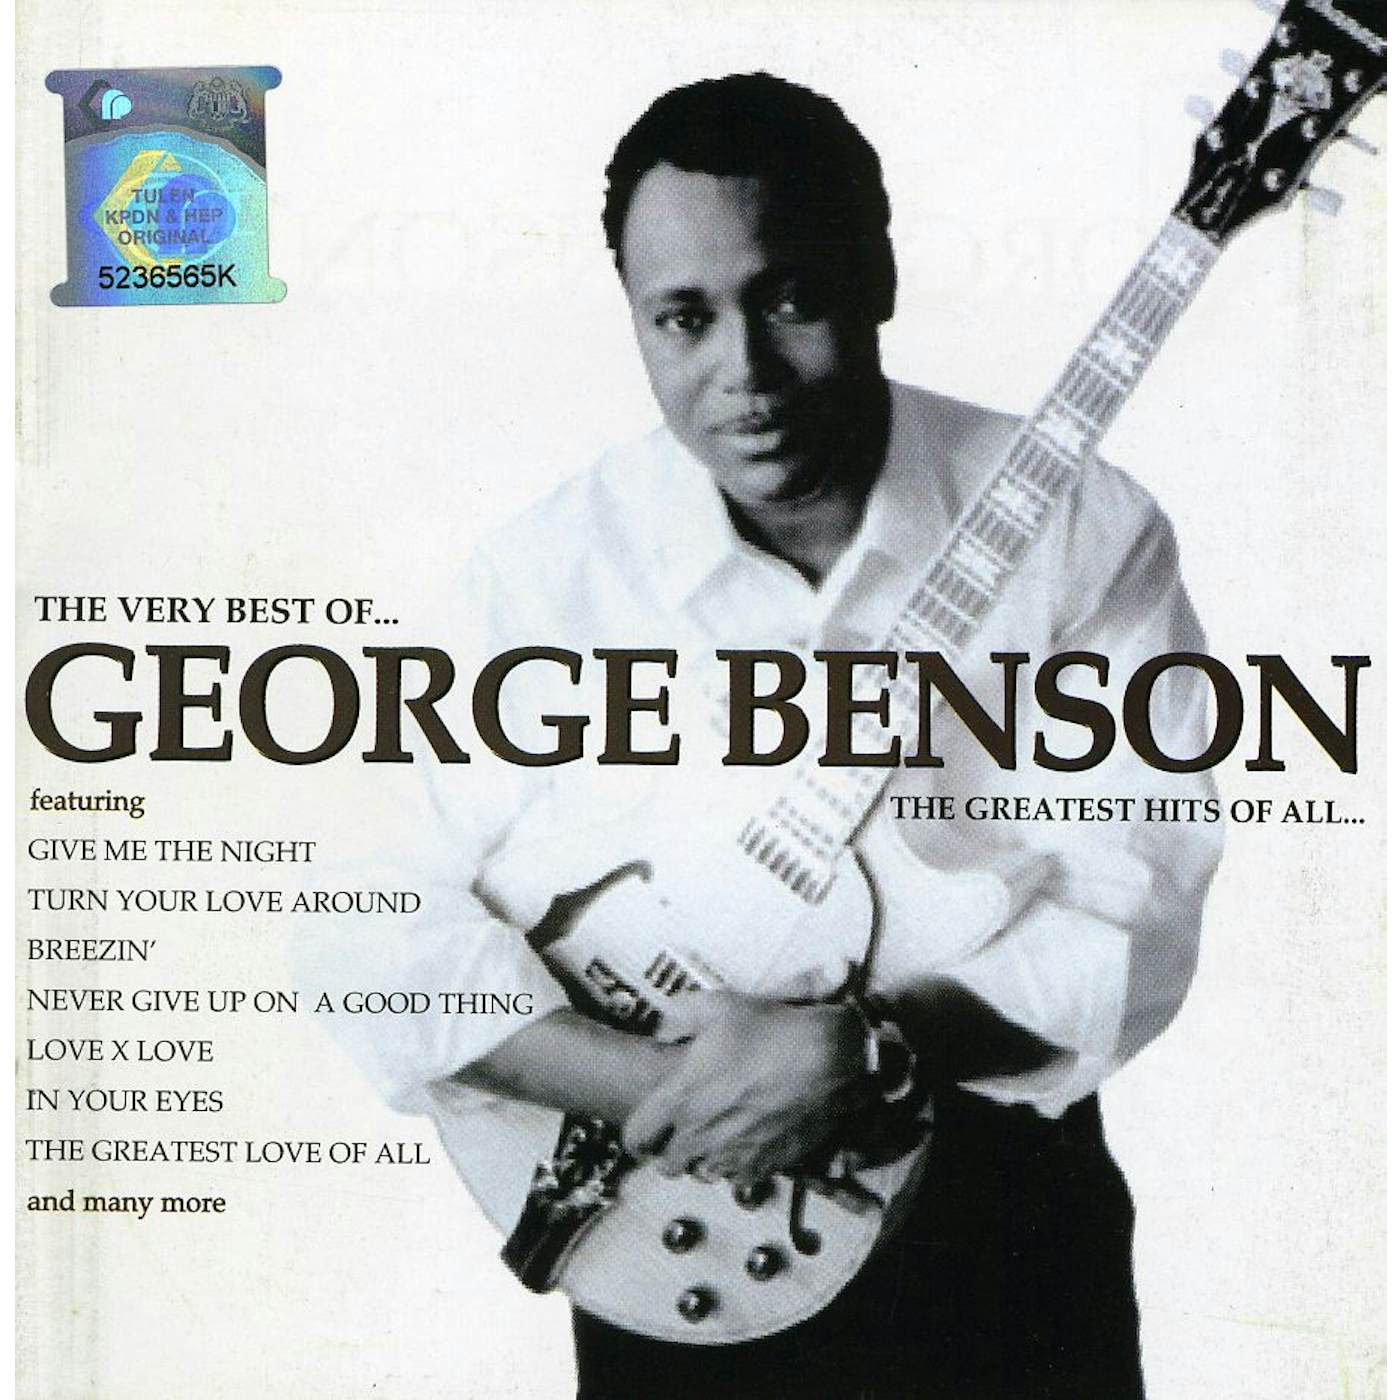 George Benson GREATES HITS OF ALL CD